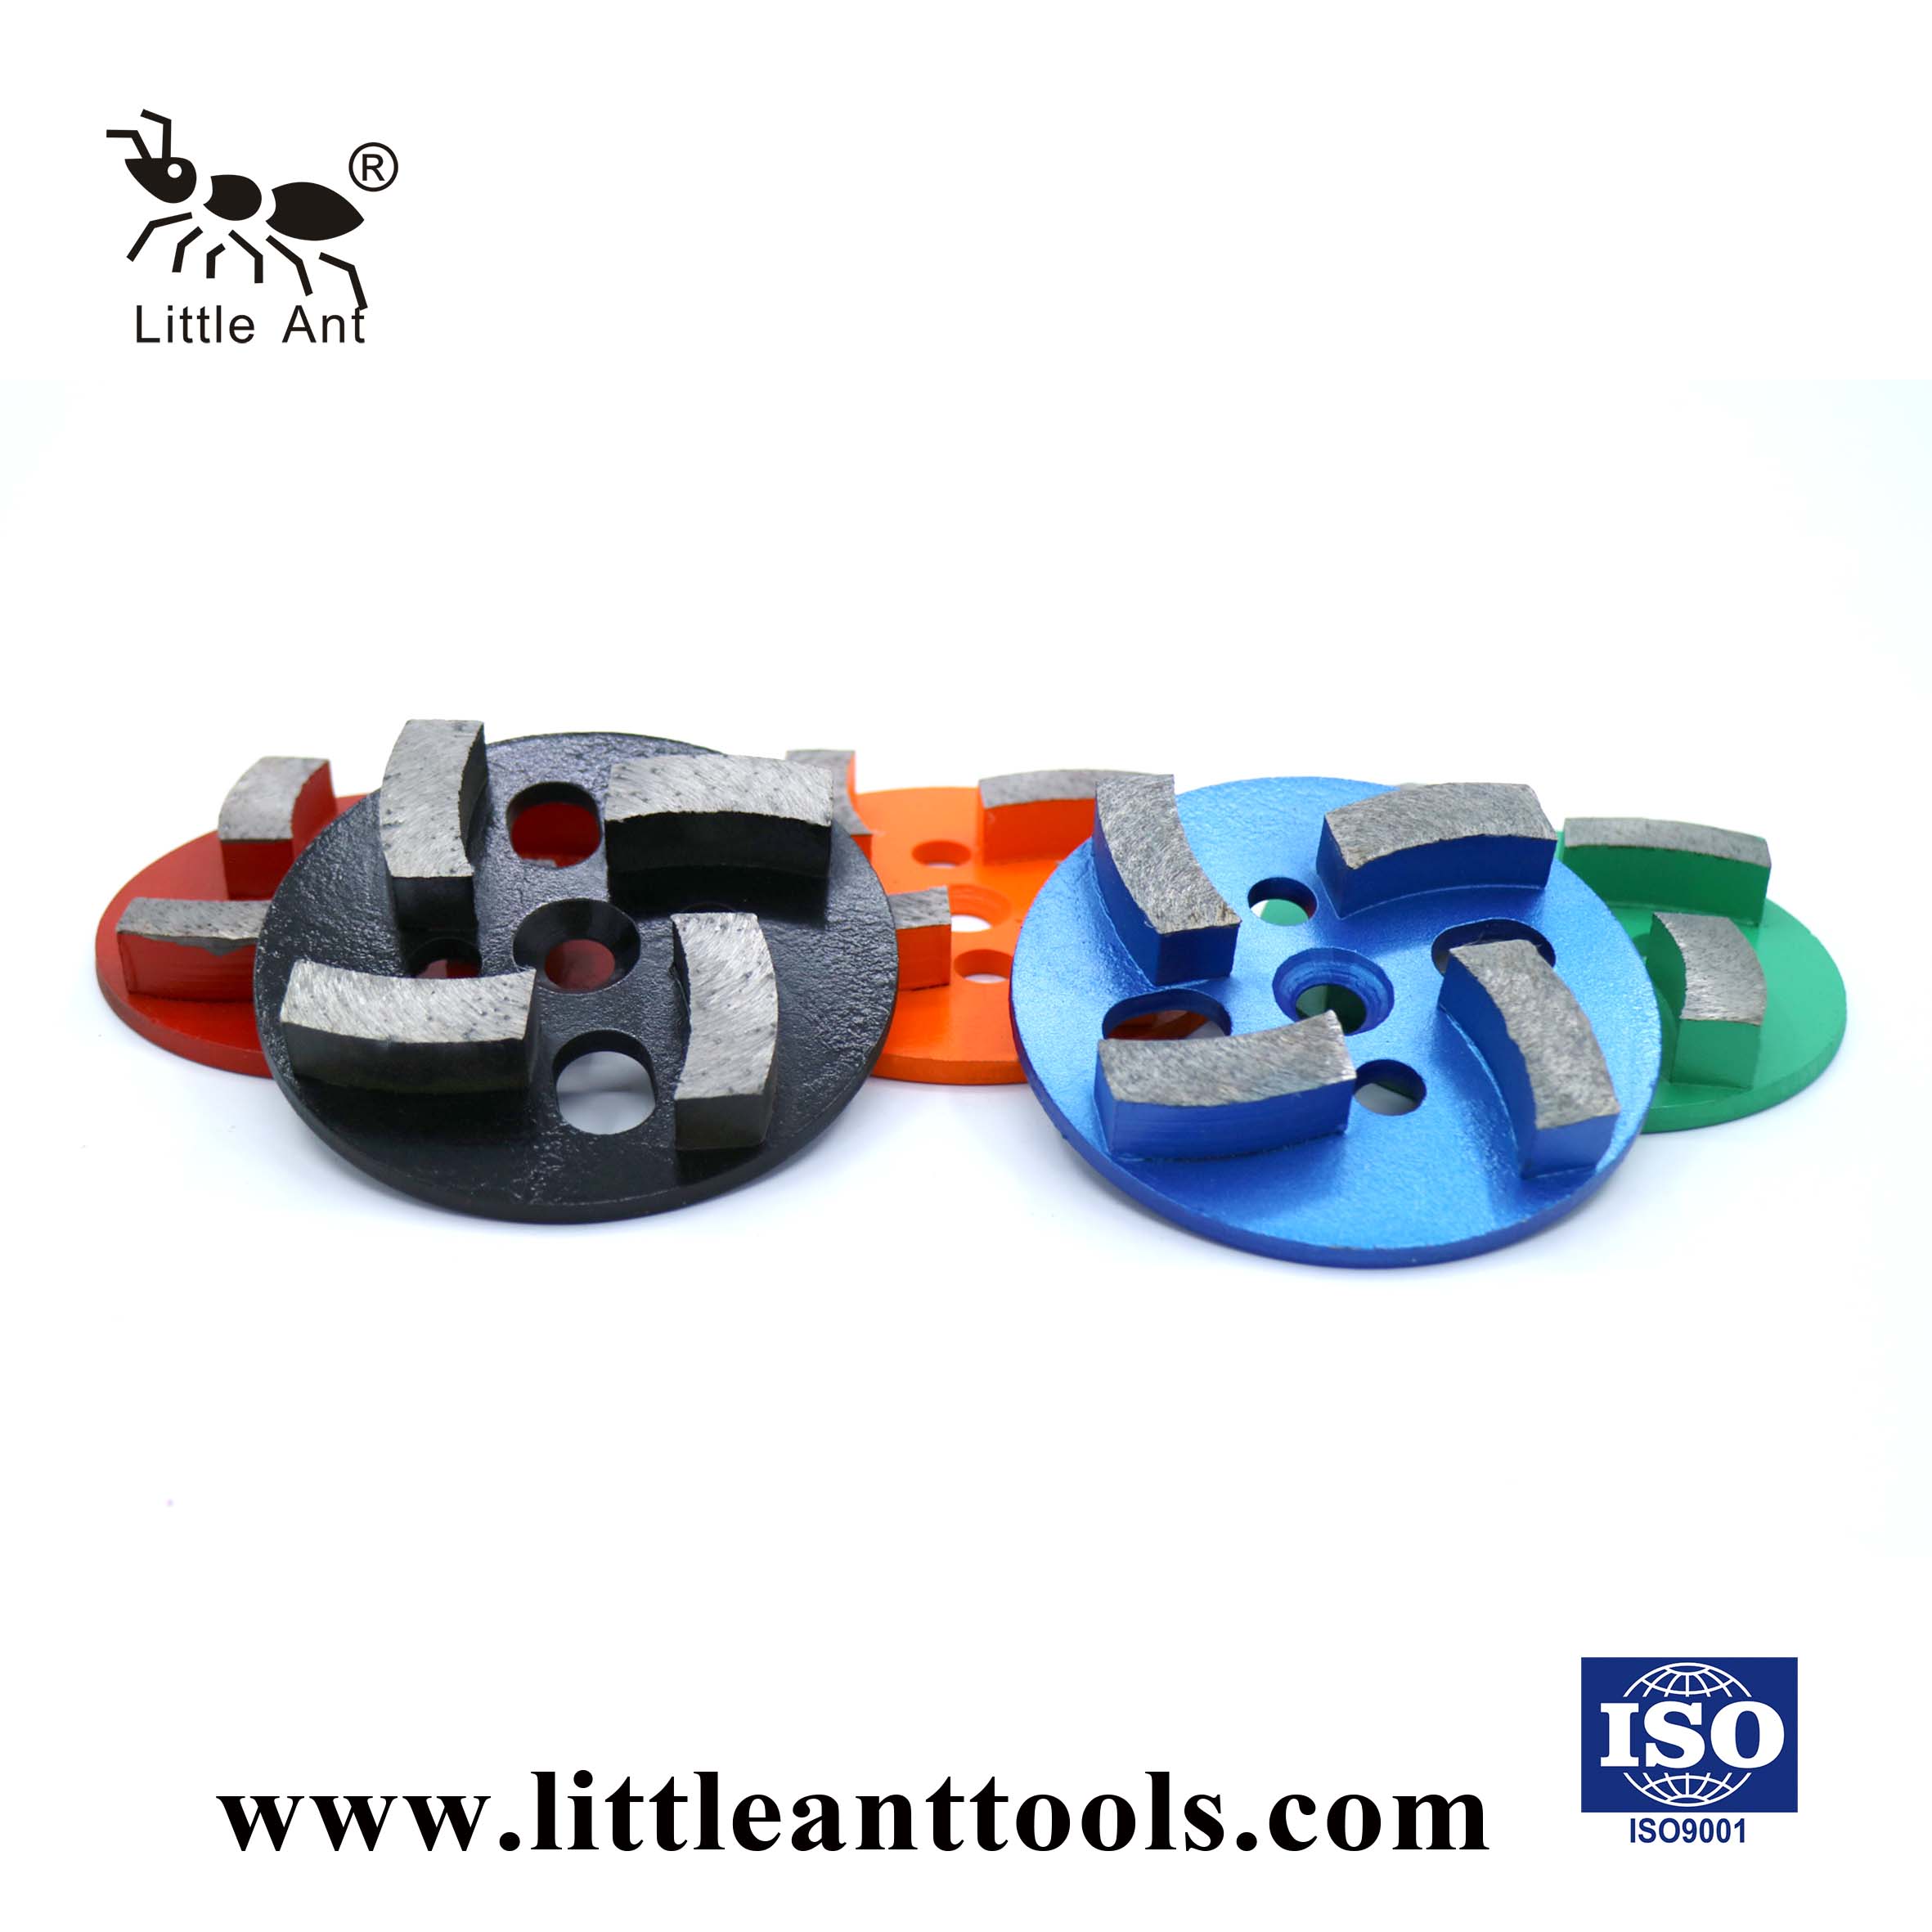 LITTLE ANT Circular Grinding Plate Metal Tool for Concrete Dry And Wet Use 4 Arc-shaped Gears 100mm